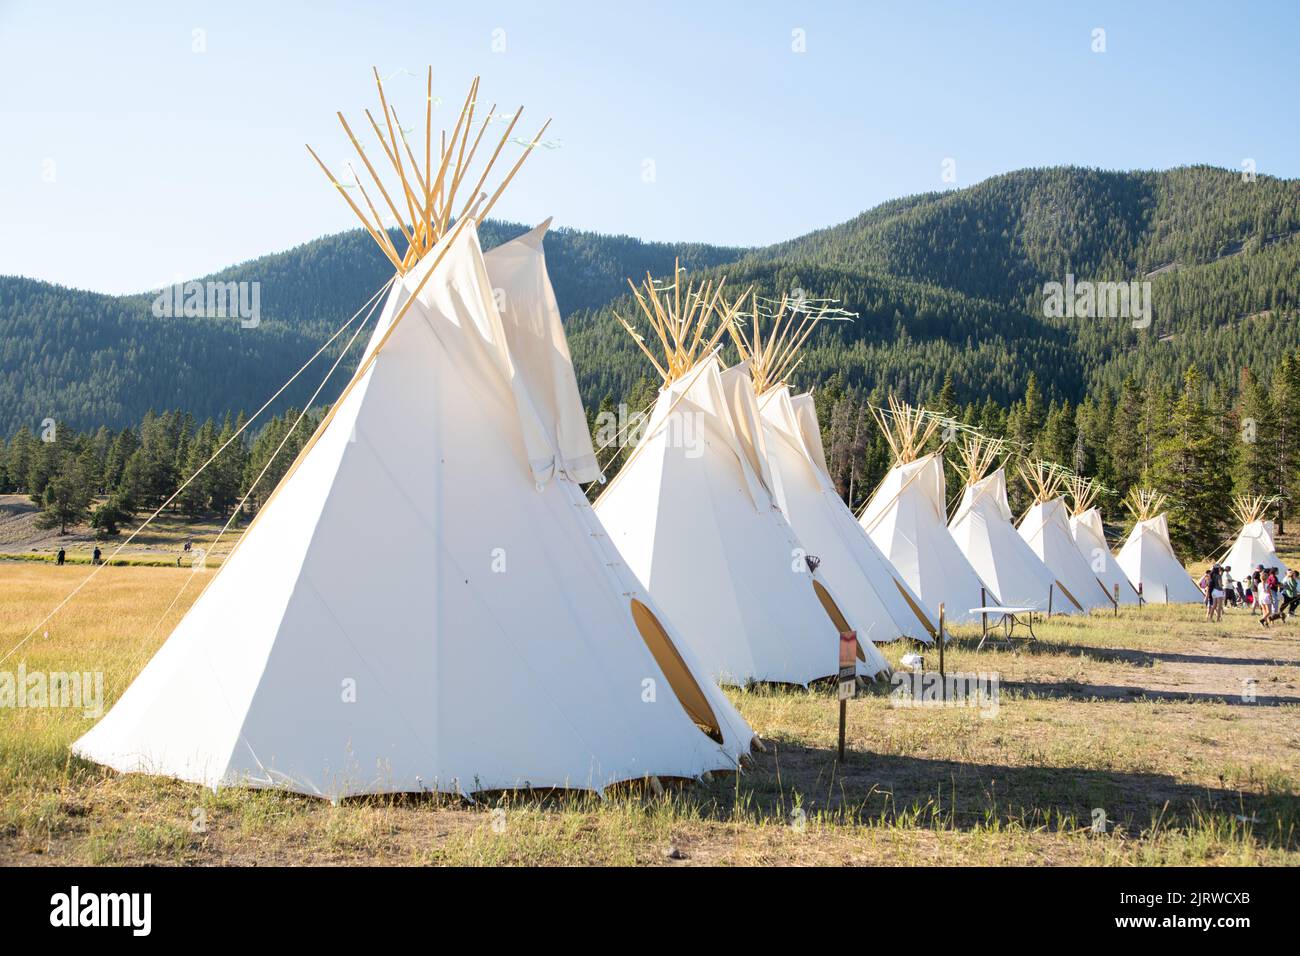 Madison Junction, United States of America. 23 August, 2022. Native American teepee lodges at the All Nations Teepee Village at the North Entrance to mark the 150th anniversary of Yellowstone National Park August 23, 2022 in Madison Junction, Montana. The project by Mountain Time Arts features 13 teepee lodges that signify a new era of Indigenous inclusion and representation in Yellowstone National Park. Credit: Ashton Hooker/NPS/Alamy Live News Stock Photo